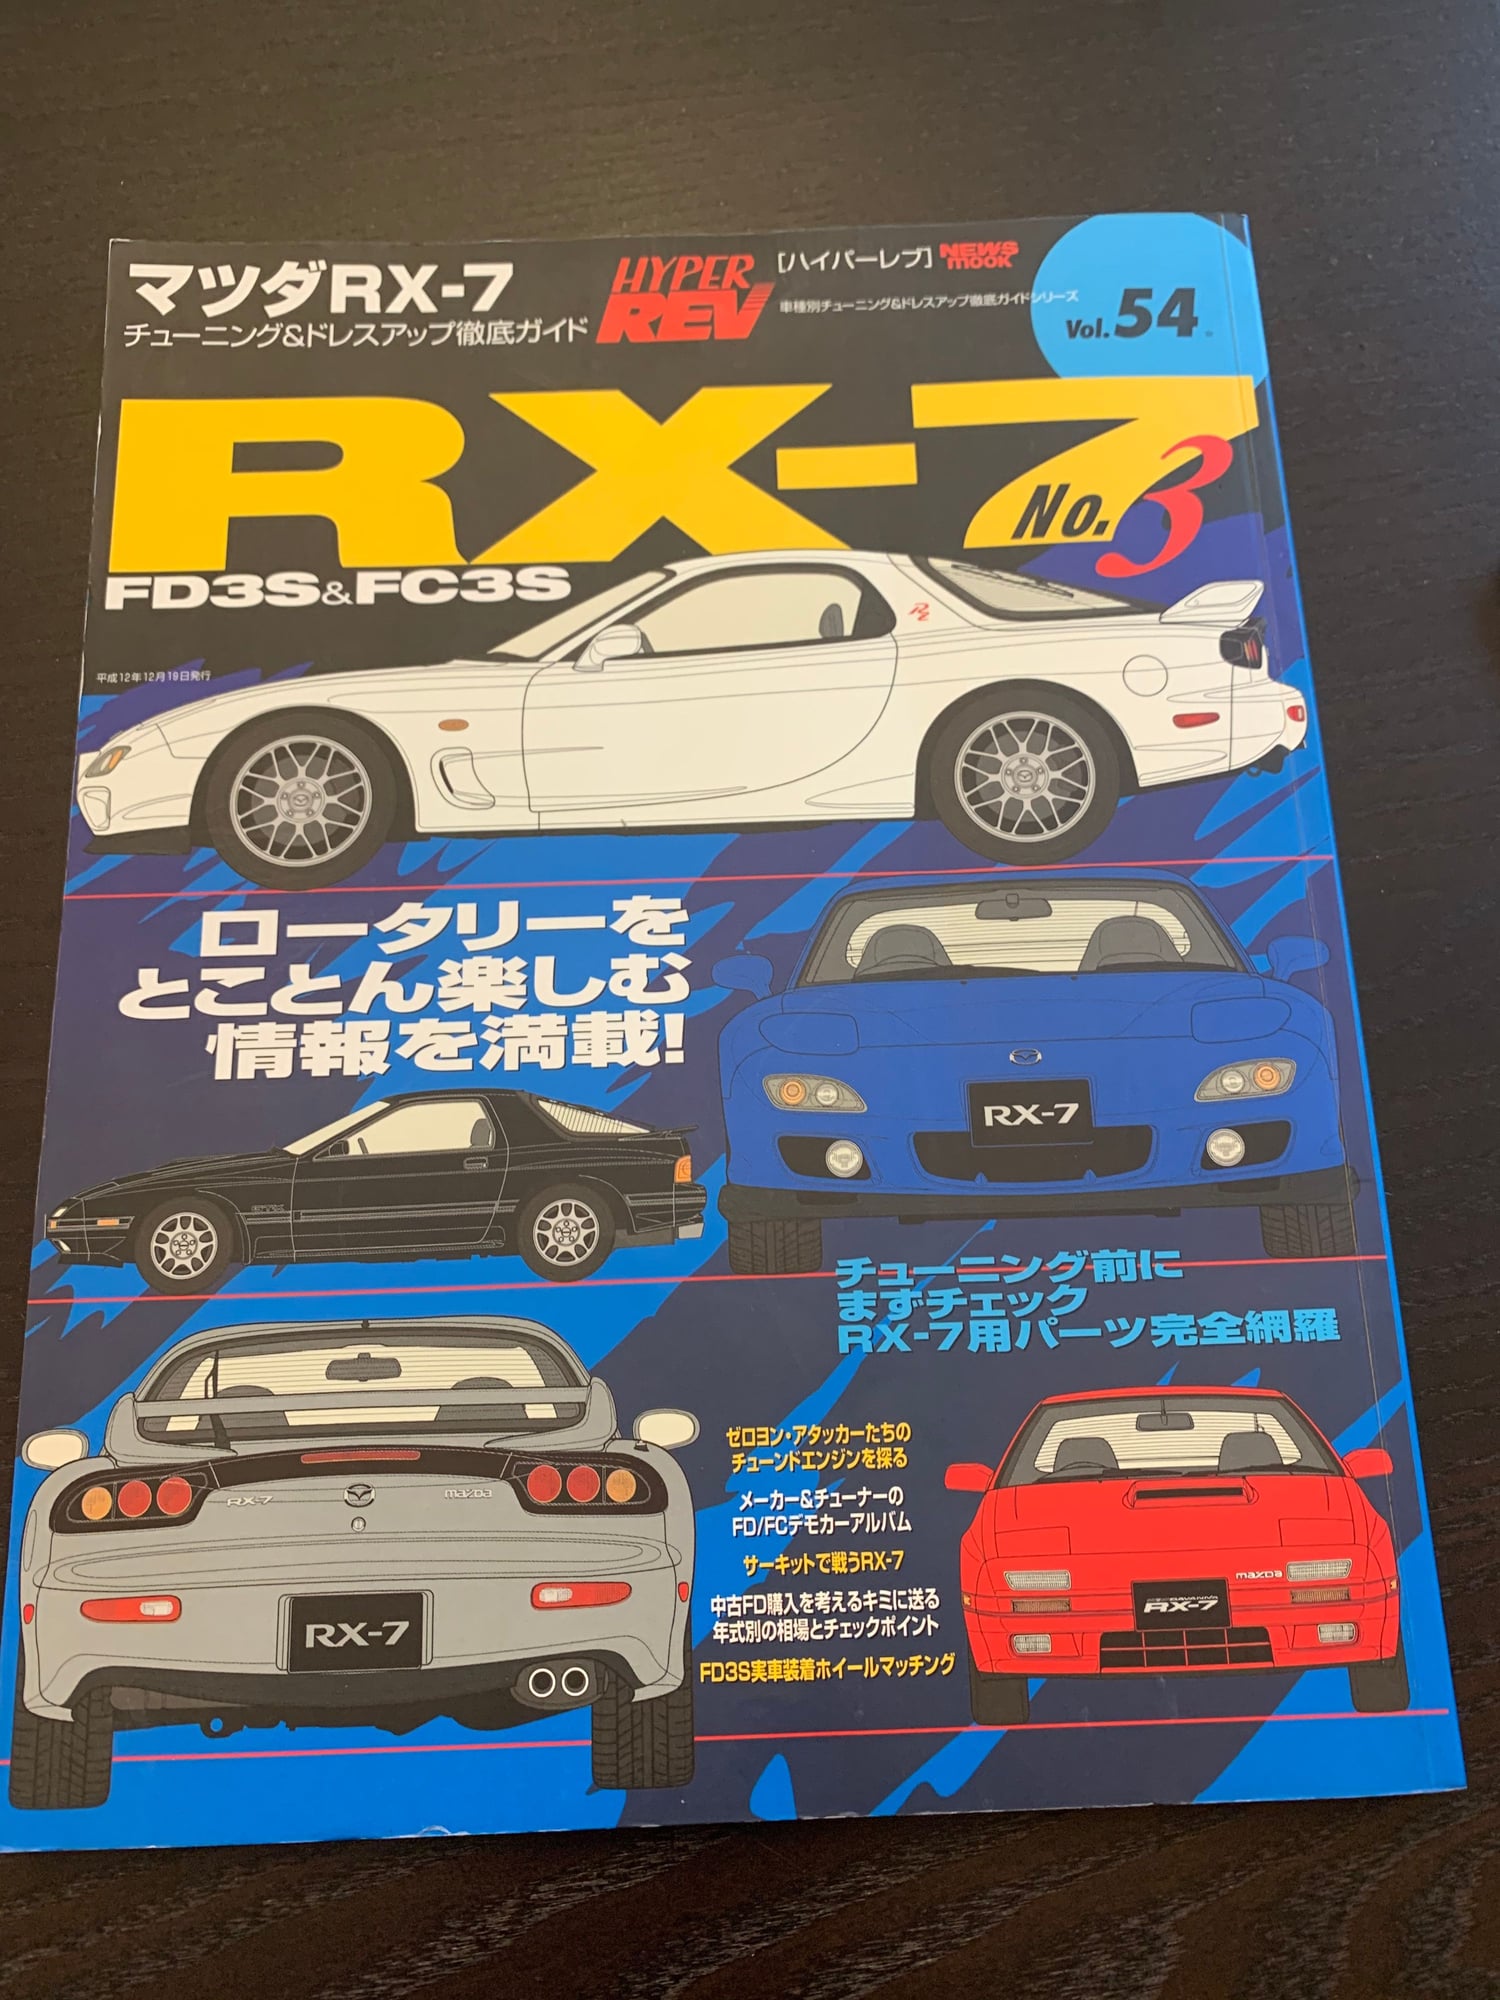 Miscellaneous - Rx7 manuals and JDM parts catalog - Used - 1993 to 1995 Mazda RX-7 - Edmonton, AB T6T0J7, Canada